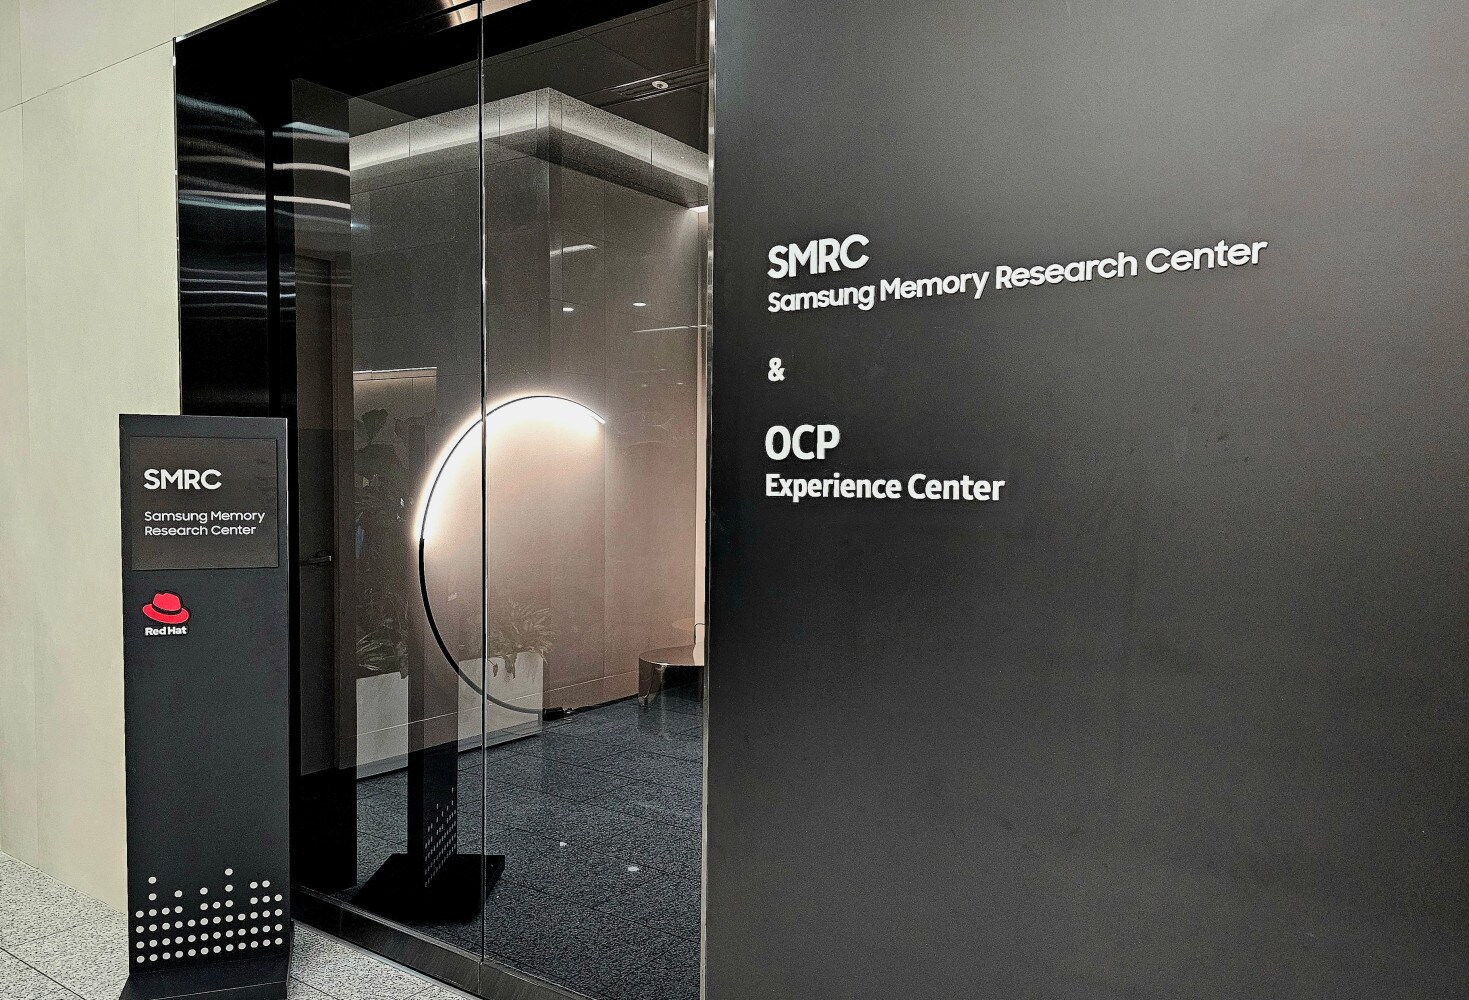 Entrance to the Samsung Memory Research Center (SMRC) and the OCP Experience Center, featuring signage with the Red Hat logo